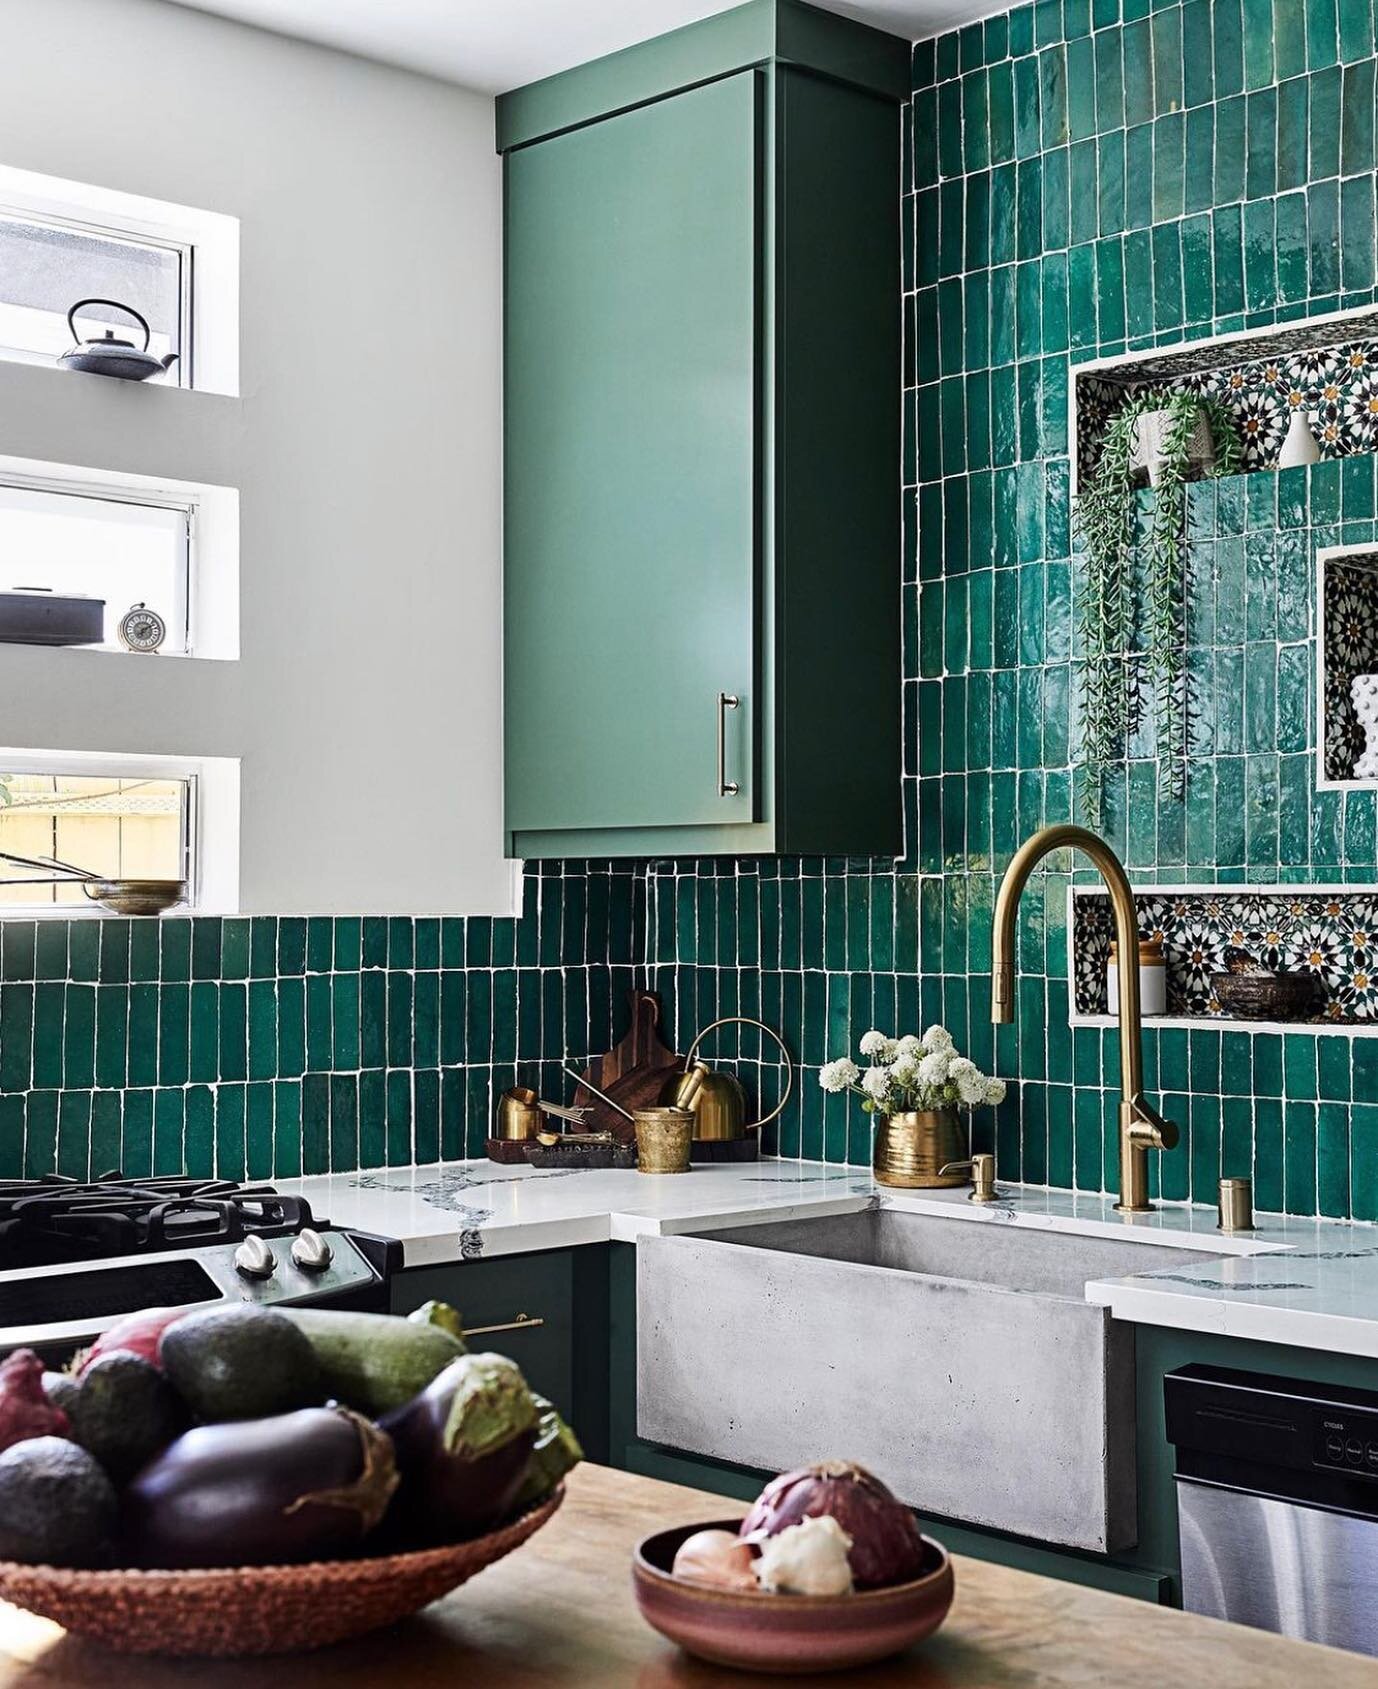 Colour can be added to your kitchen in so many different ways.
Re-tiling your backsplash or just adding a bowl of aubergines!
Let your kitchen reflect your personality as much as all of the other rooms in your home.
And if you&rsquo;re a bit stuck as